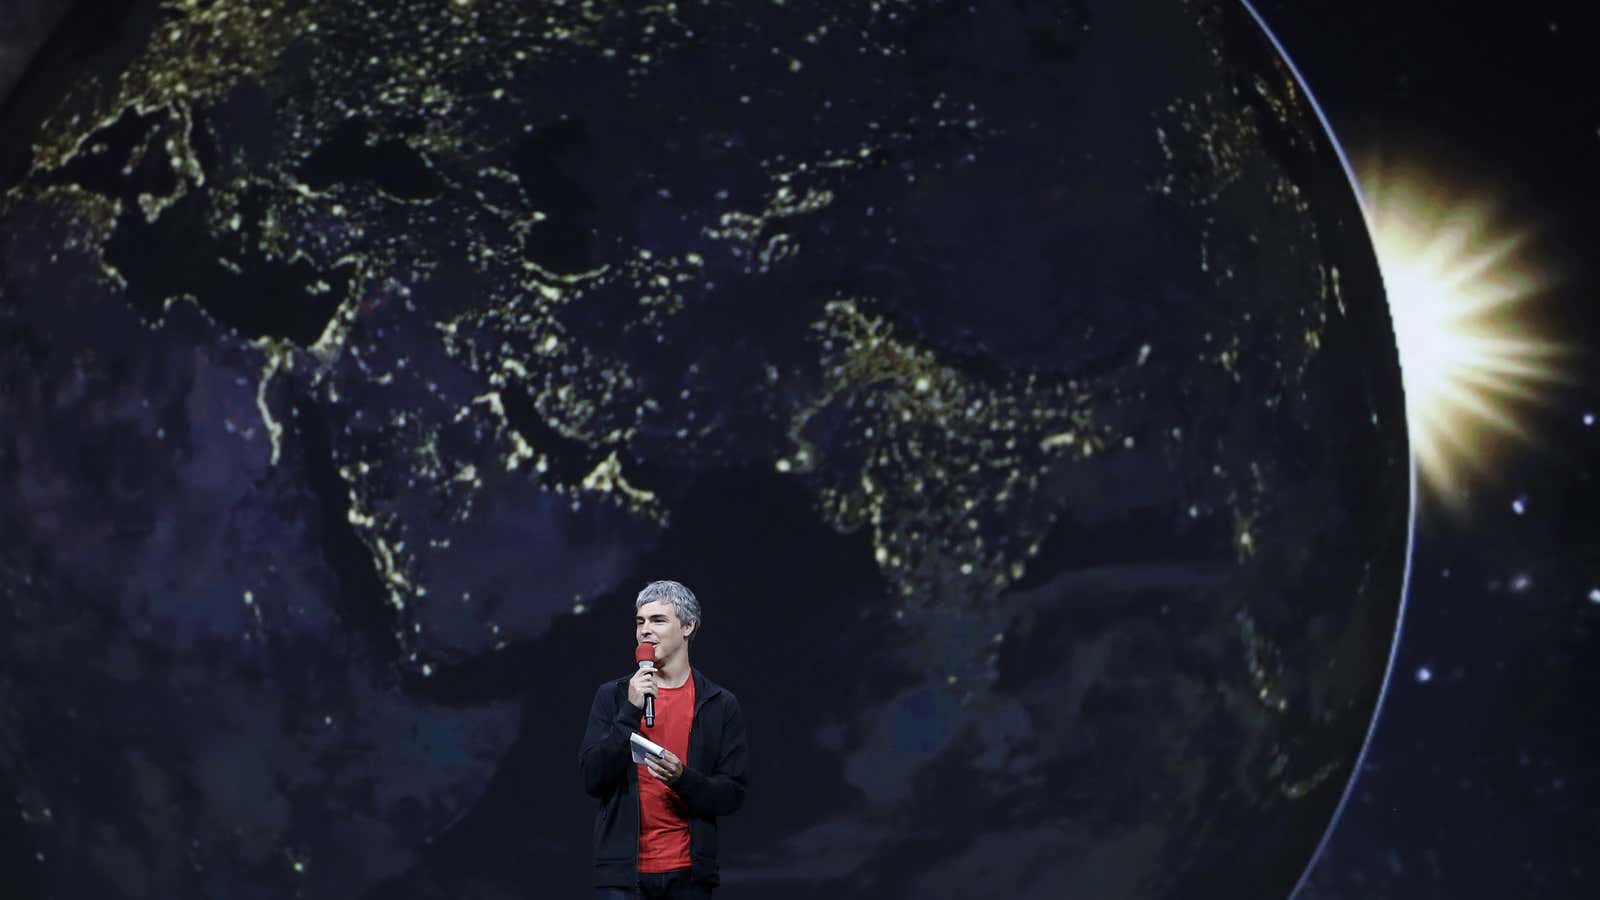 Google’s Larry Page contemplates world domination.